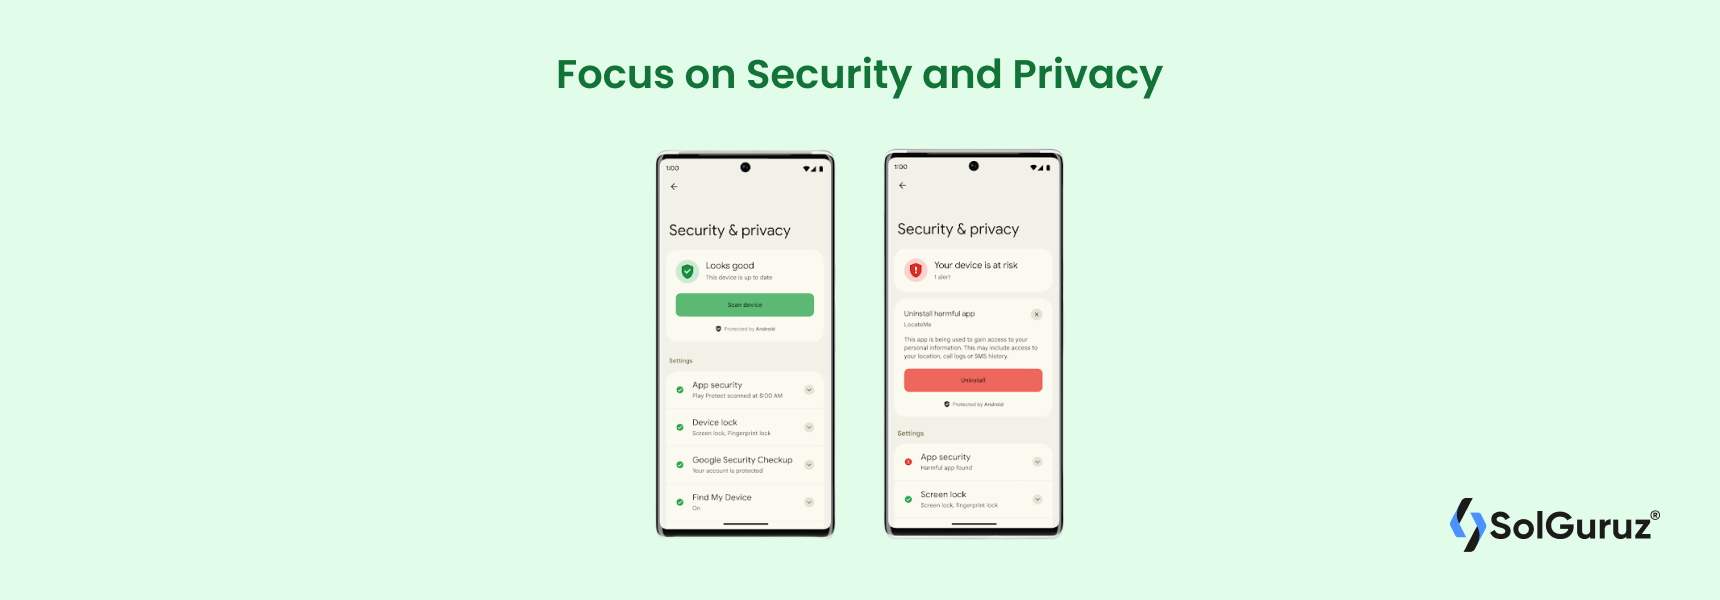 Focus on Security and Privacy - Android App Development Trends